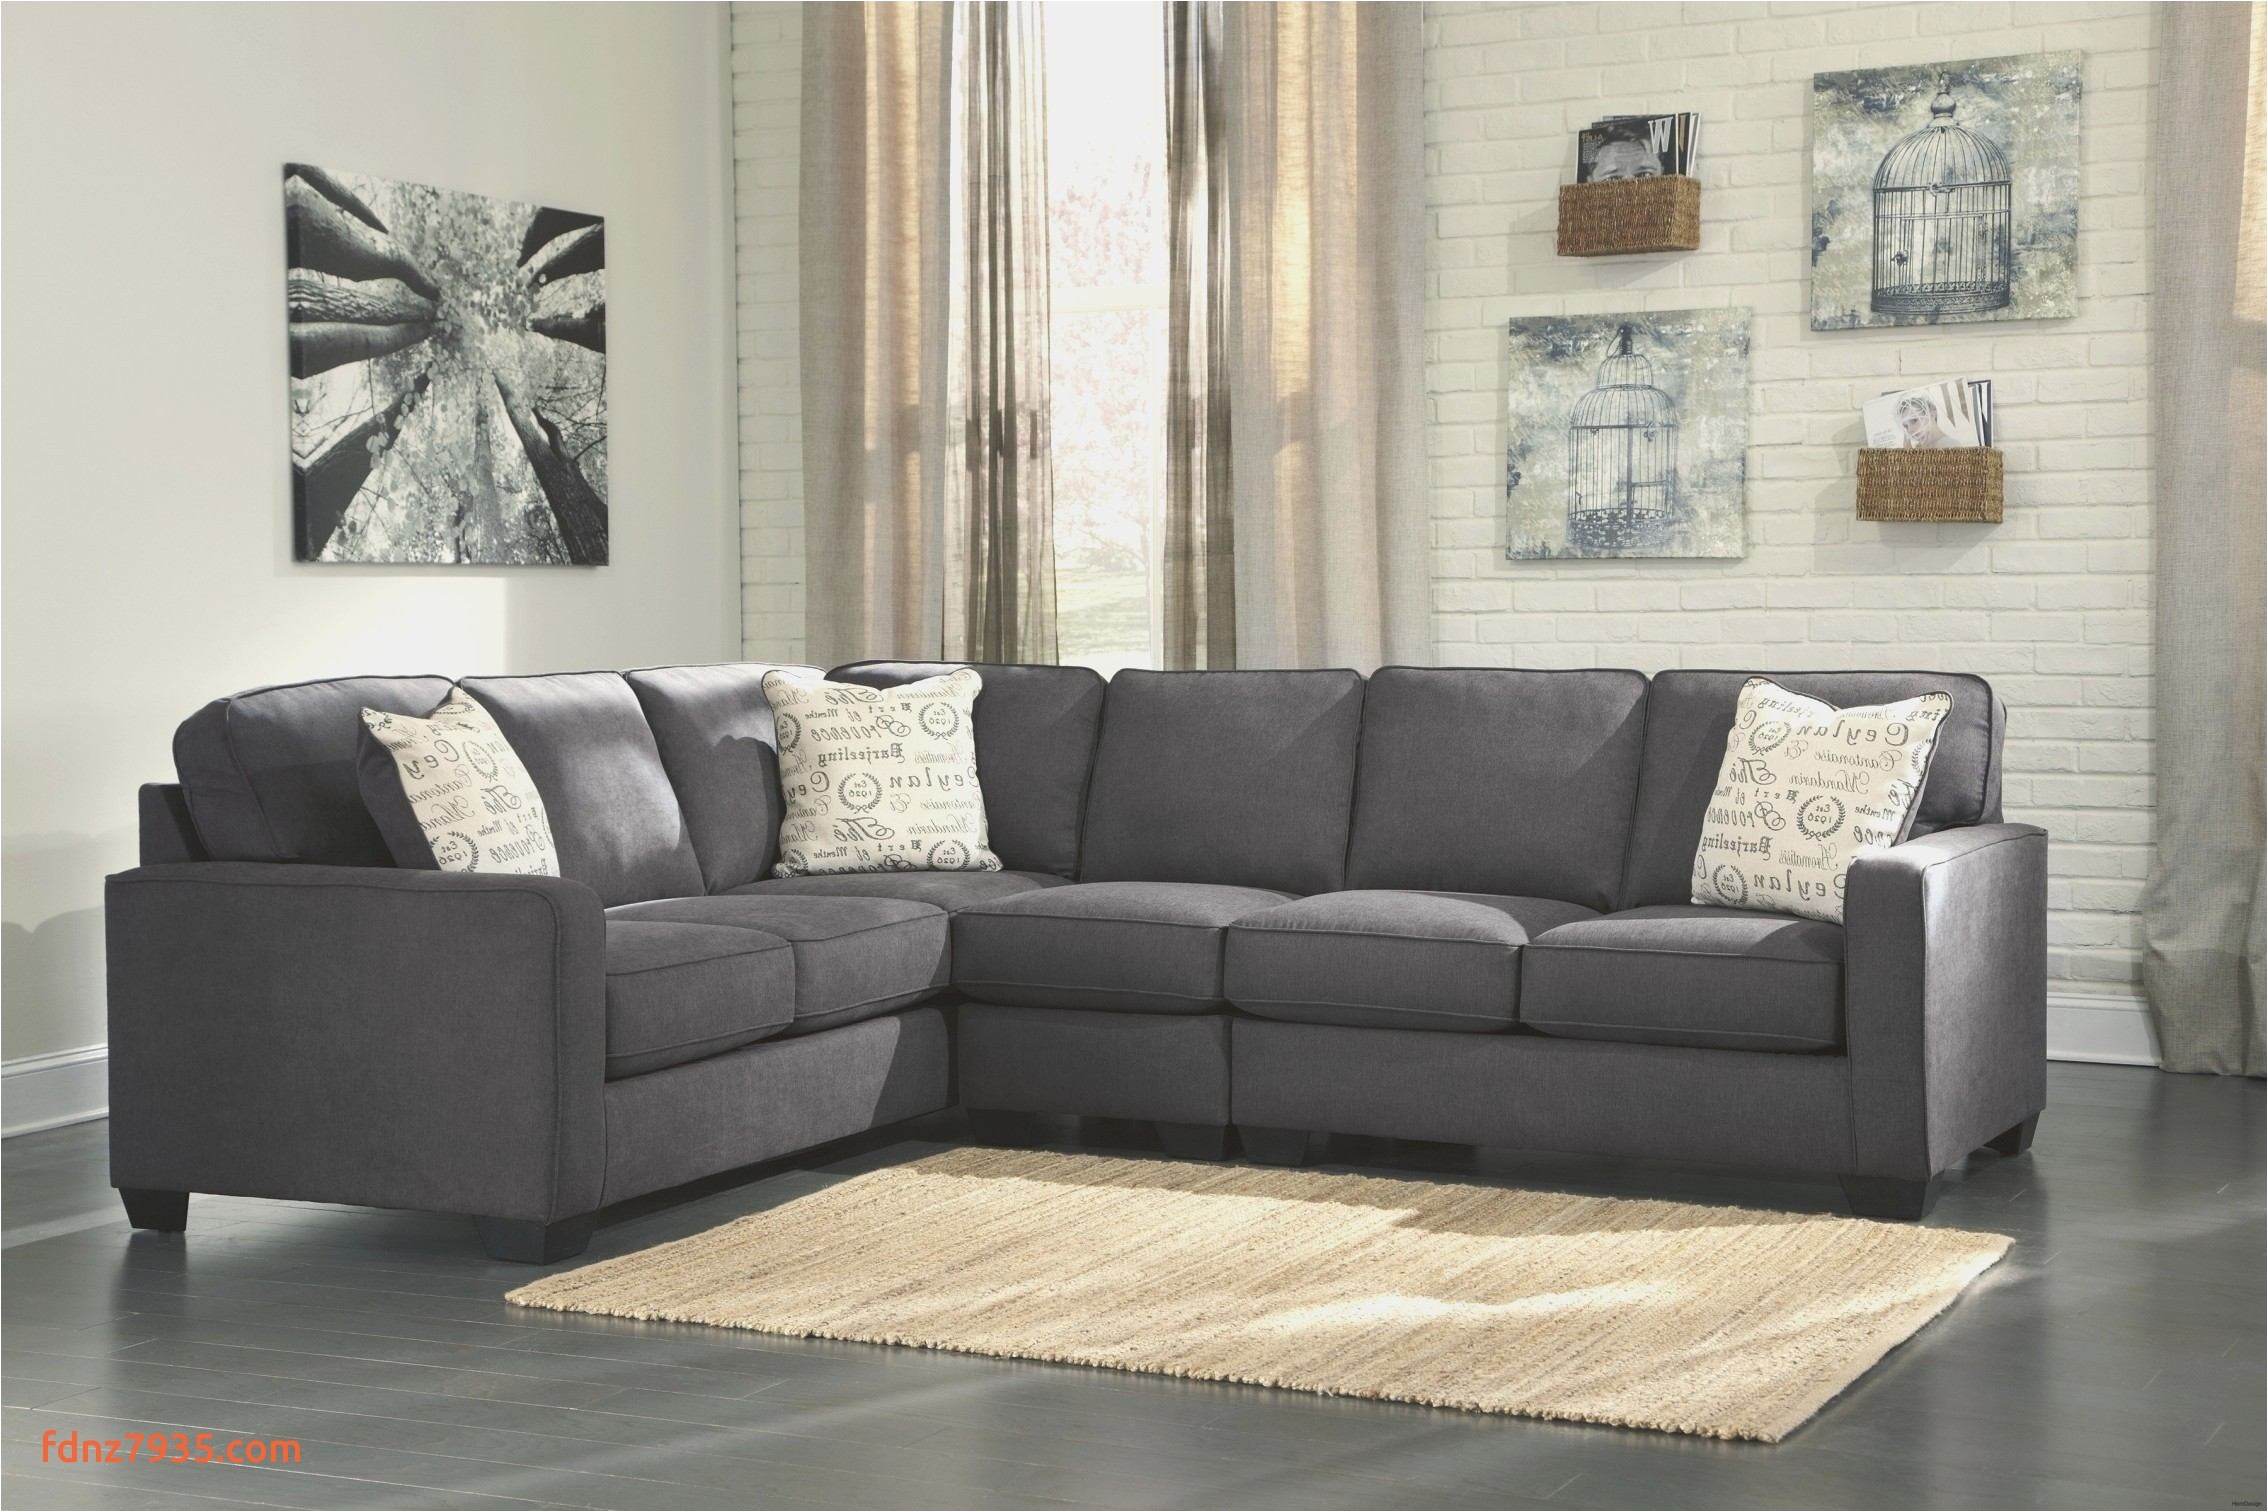 sectional sofa living room stylish american freight furniture reviews inspirational stunning sectional sofa living room